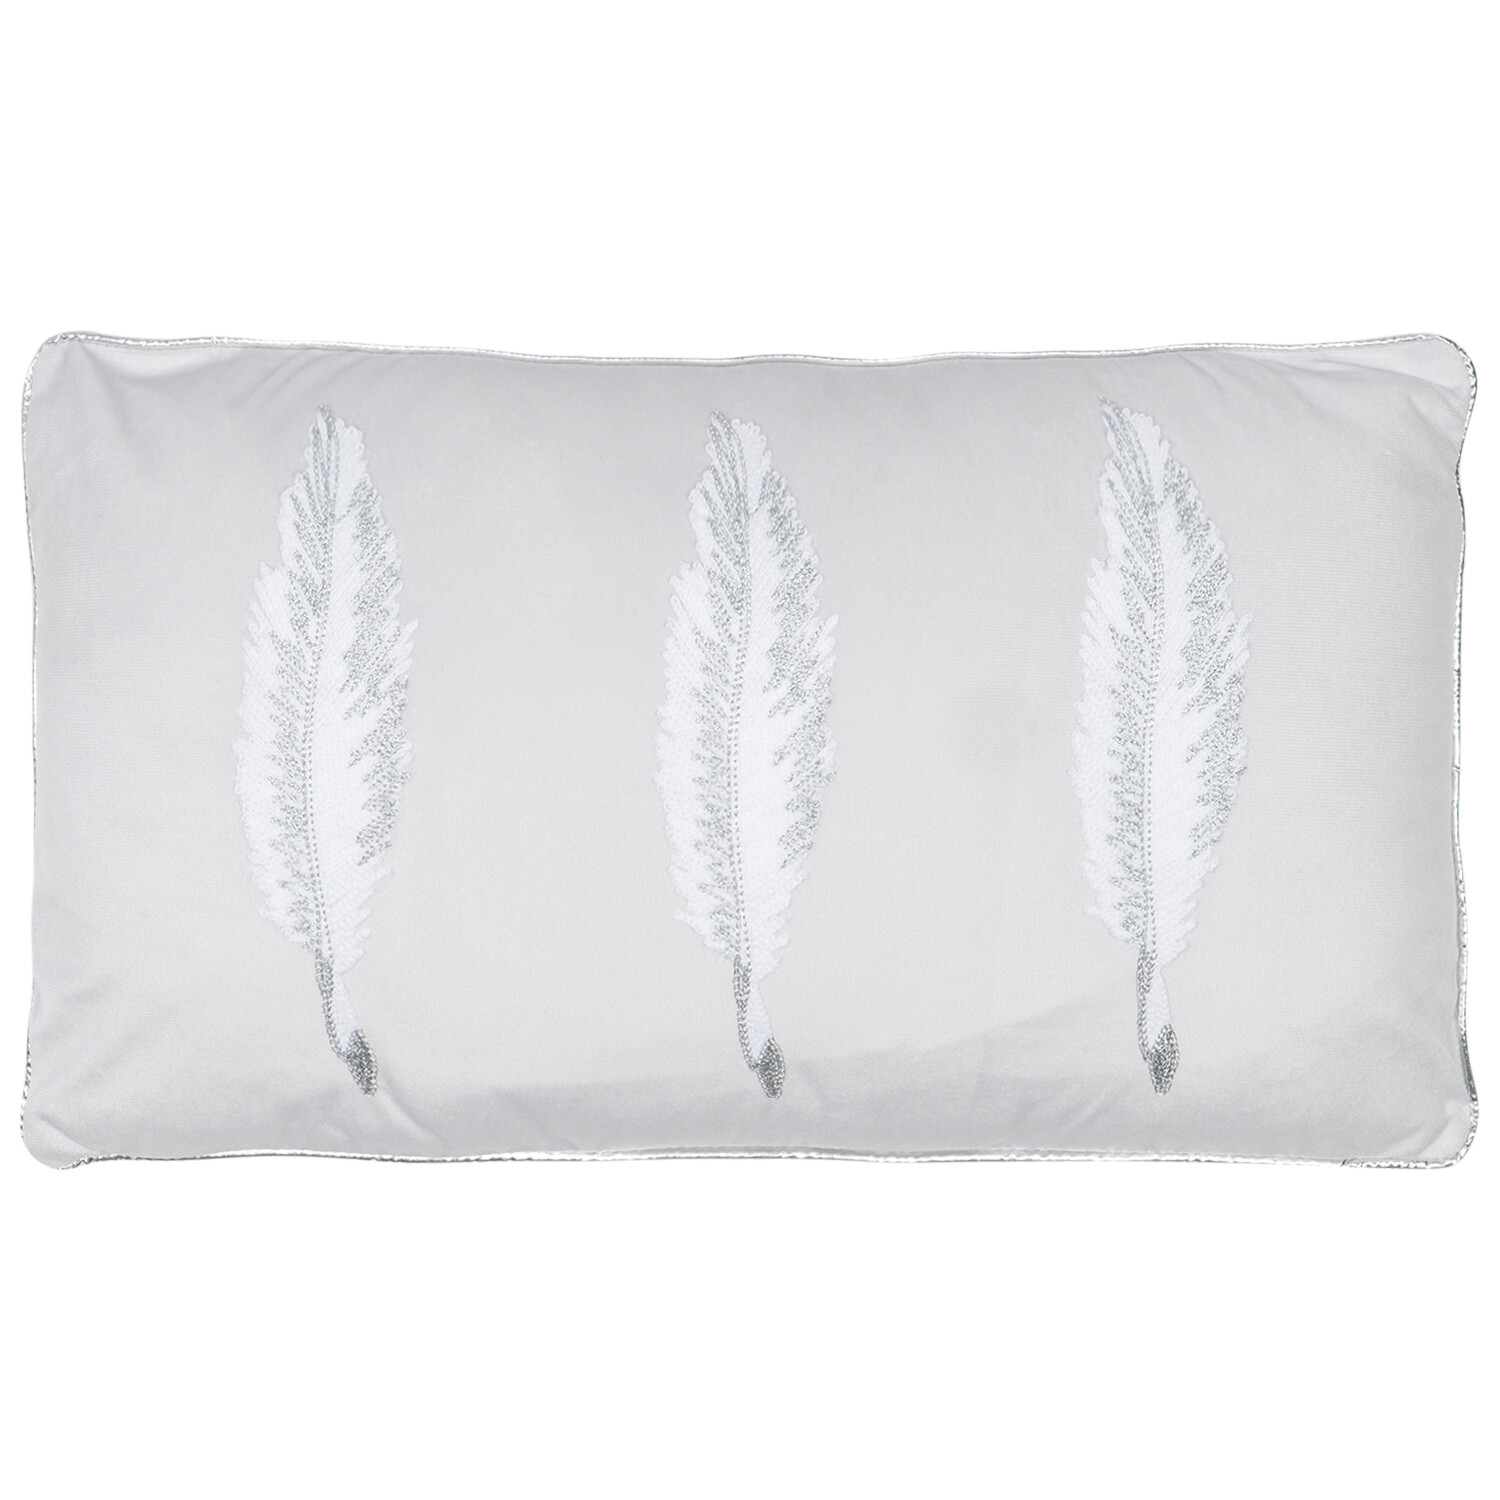 Divante Embroidered Feather Cushion 30 x 50cm Image